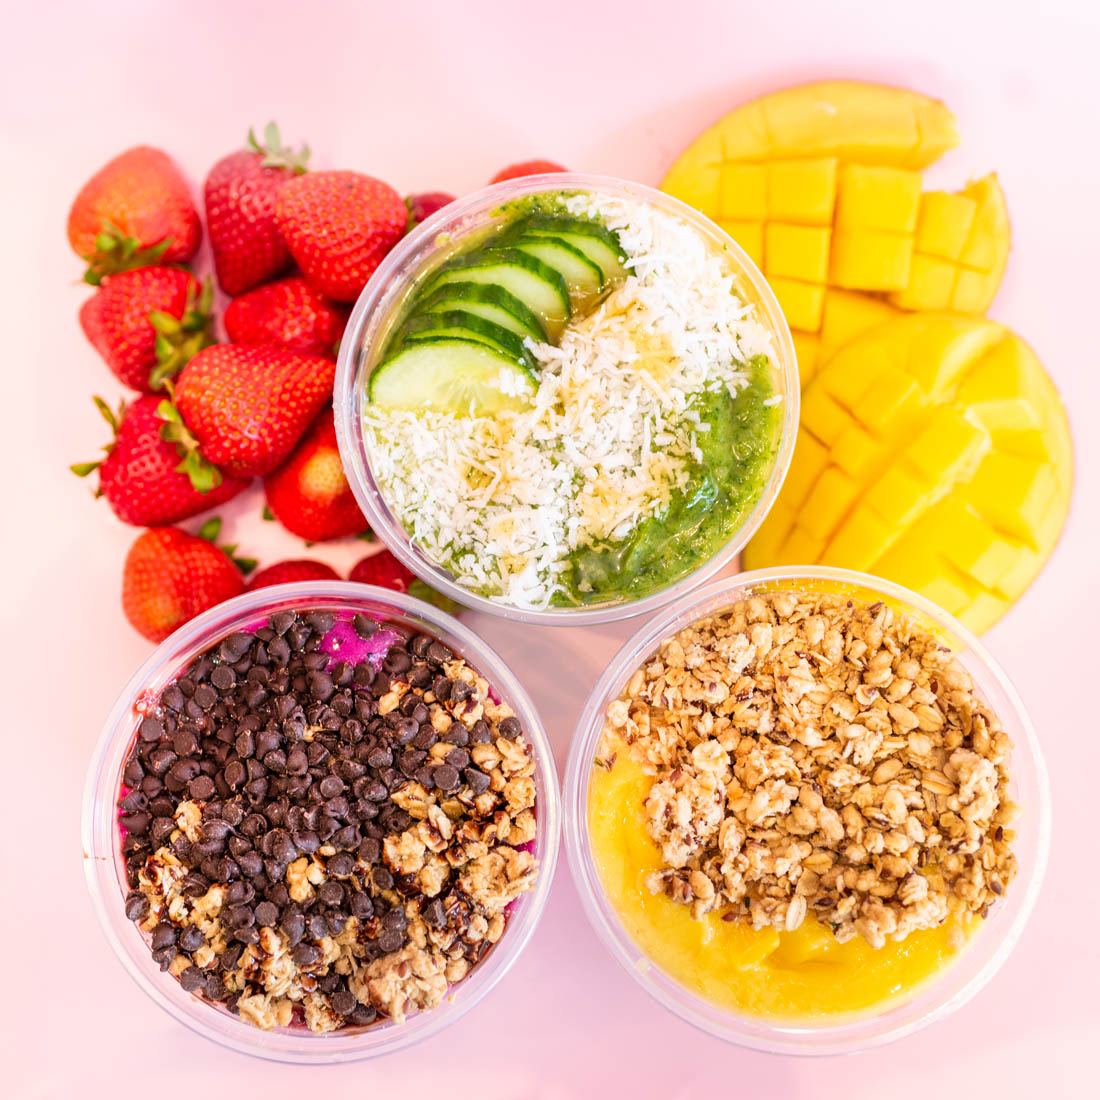 Rush Bowls smoothie bowls nutrition info in Fort Collins.